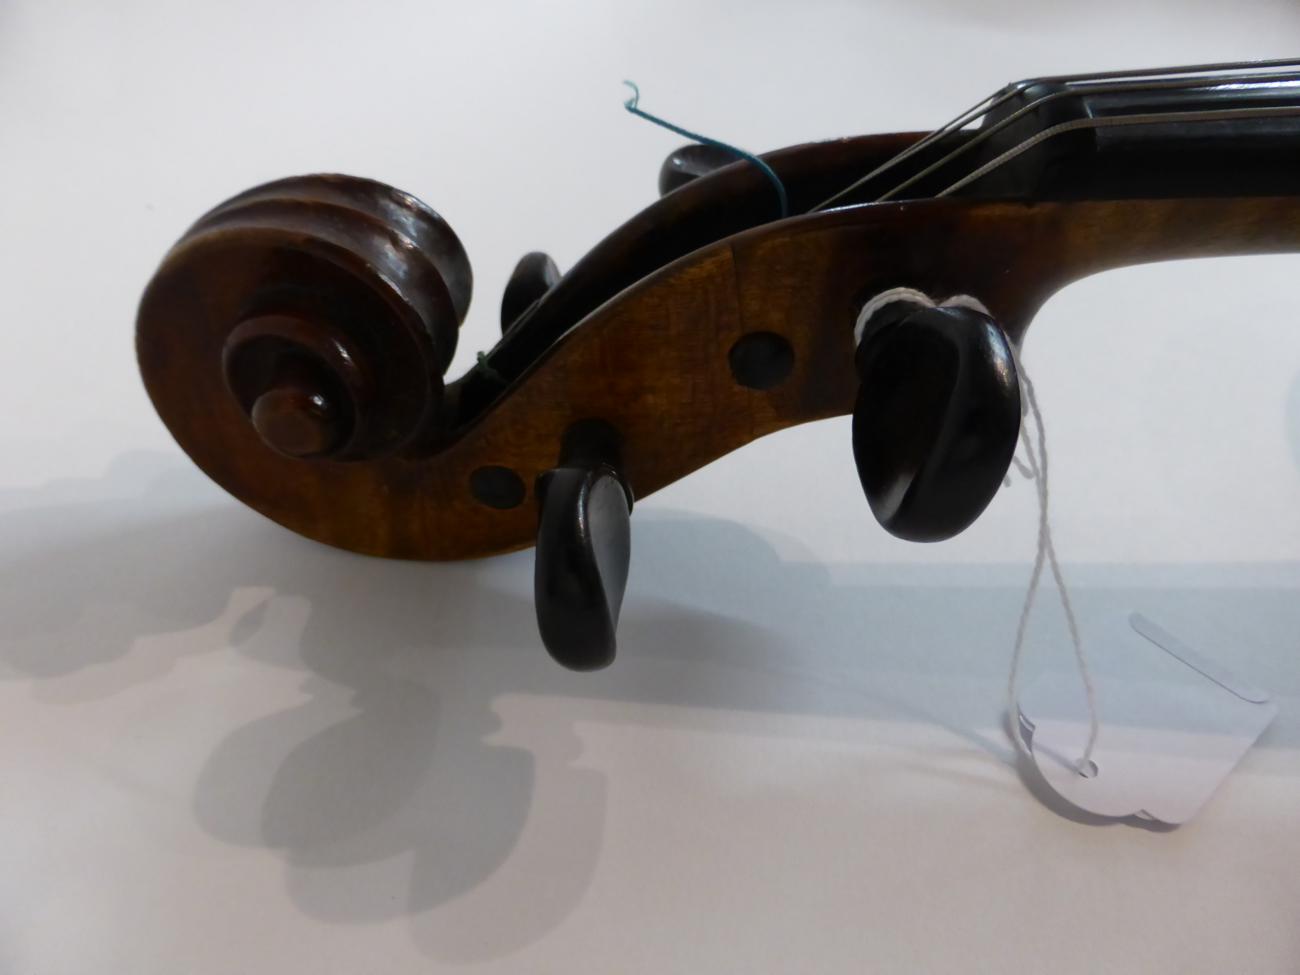 Viola (Possibly German) 15 1/2'' two piece flamed wood back with bow and chin rest, dark varnish, - Image 4 of 8